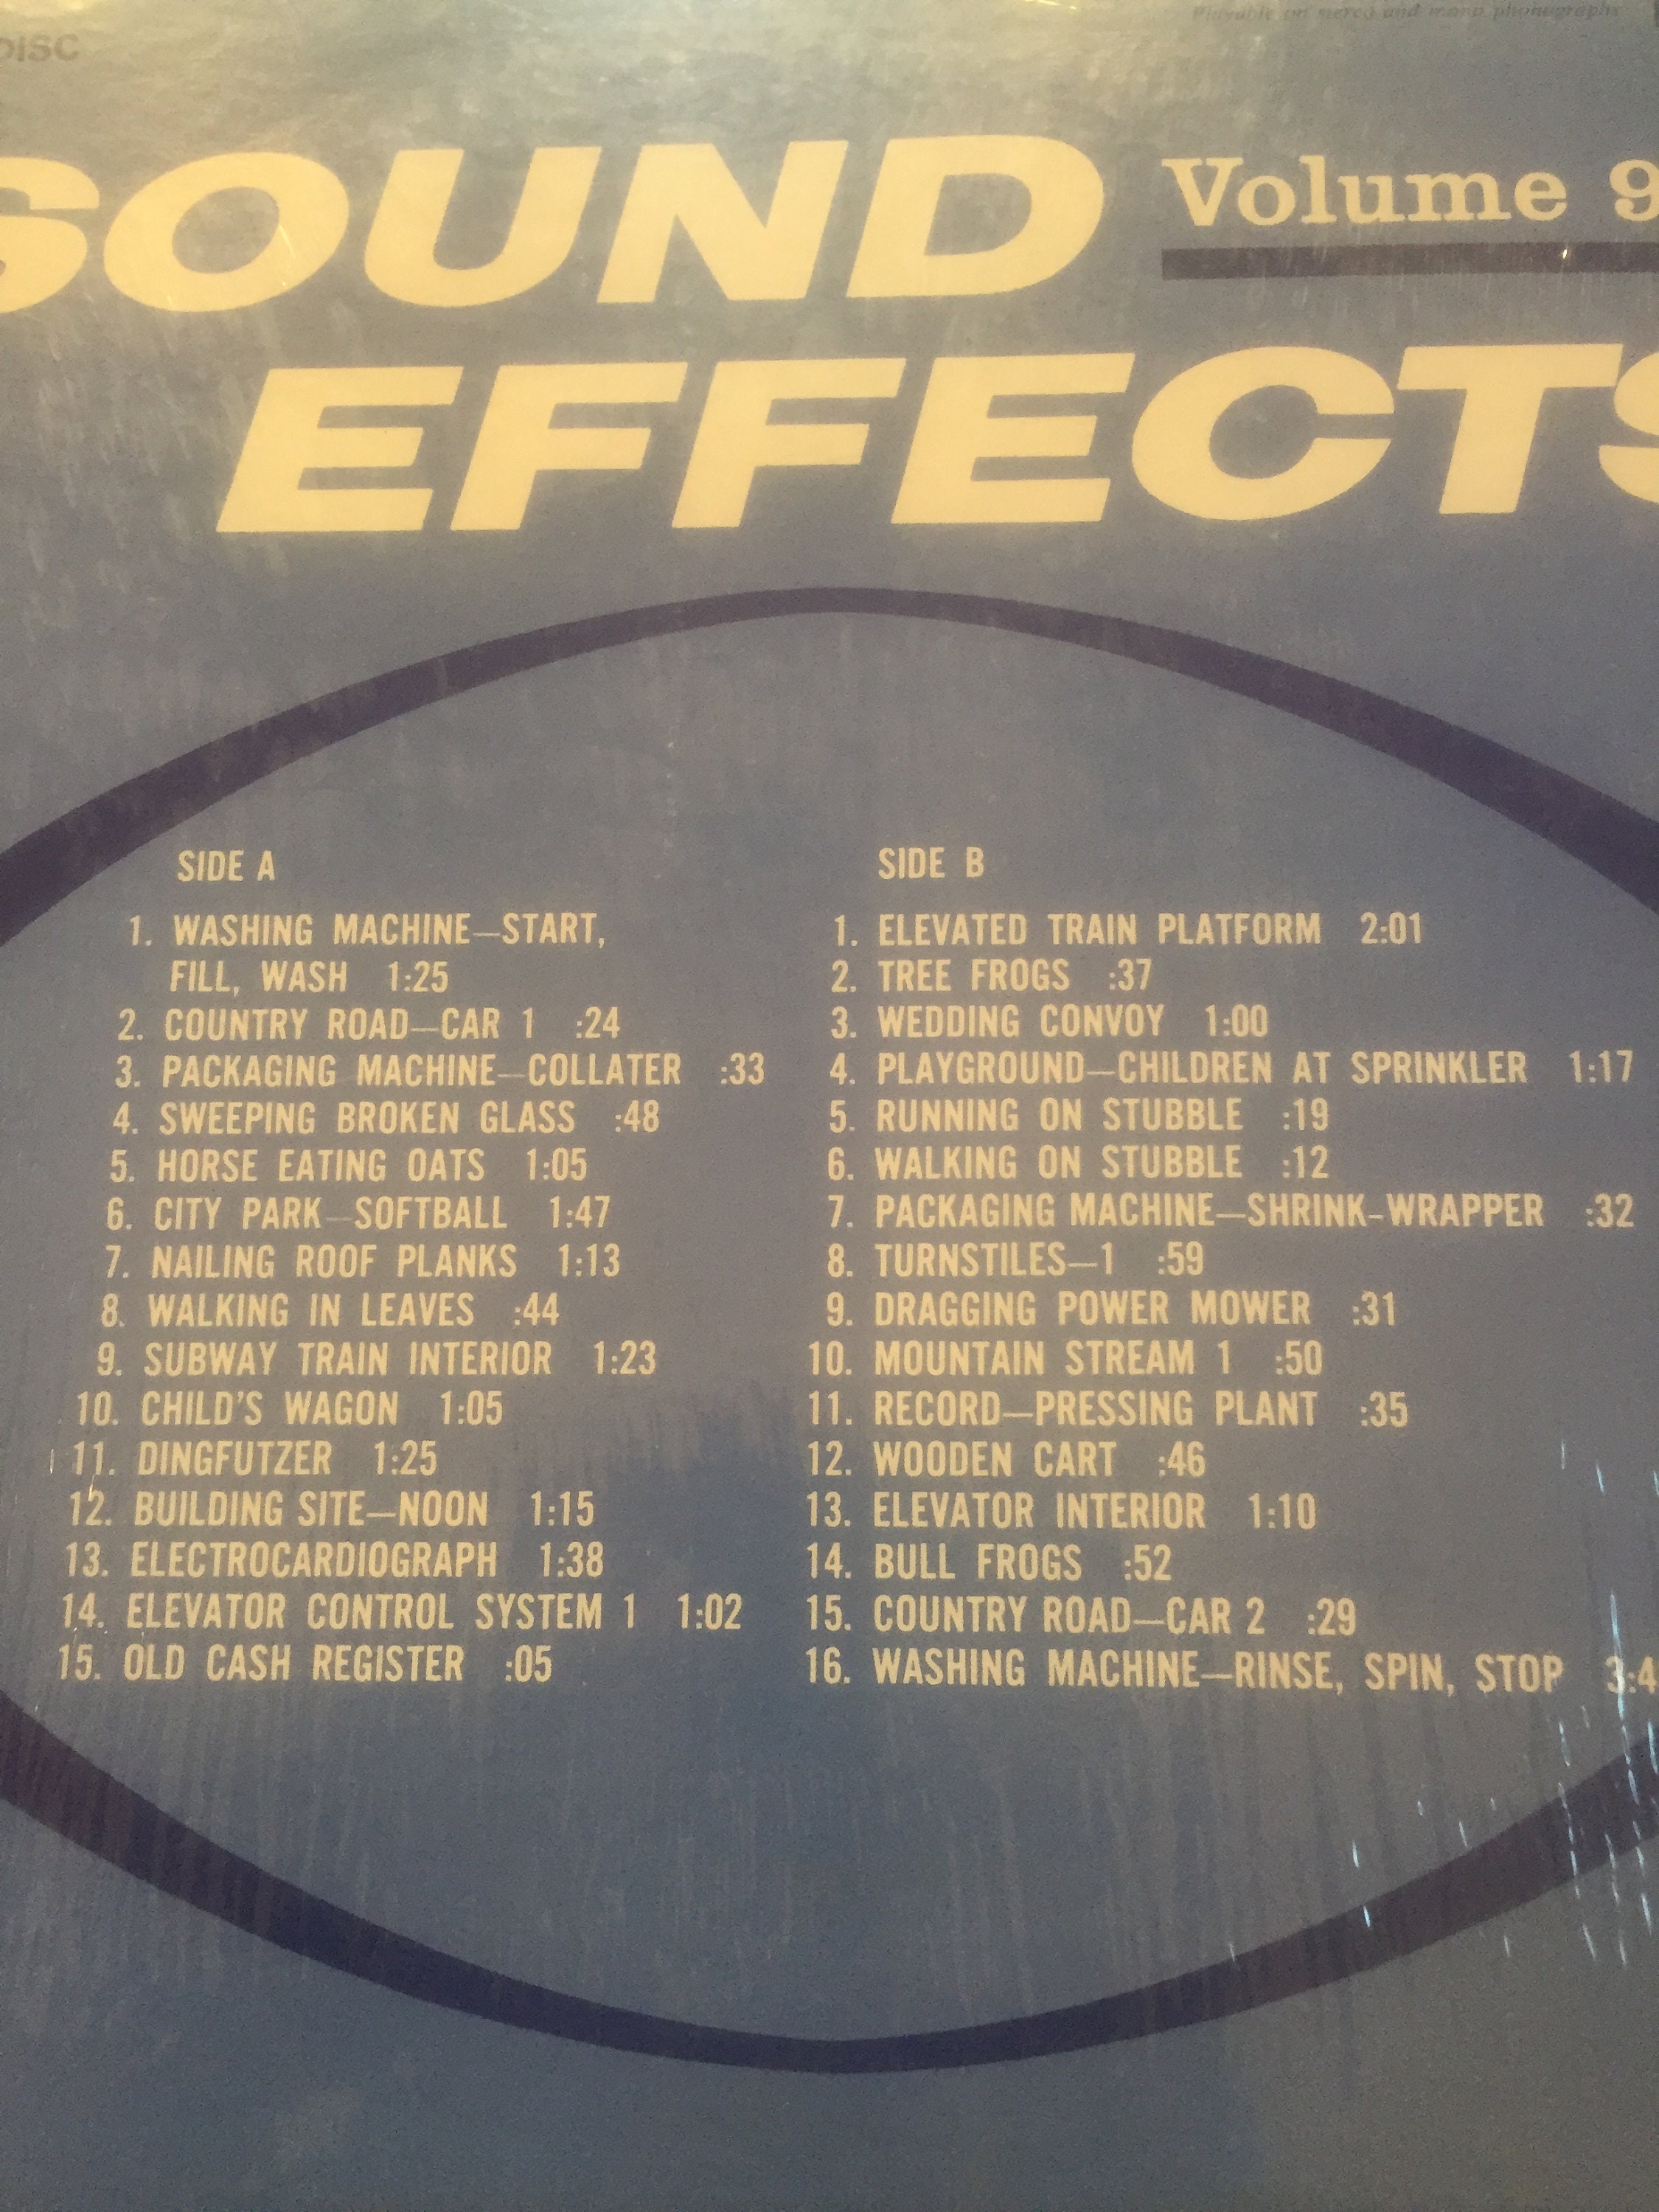 Buy Sound Effects Volume 9 Sealed Vinyl Record Online in India -